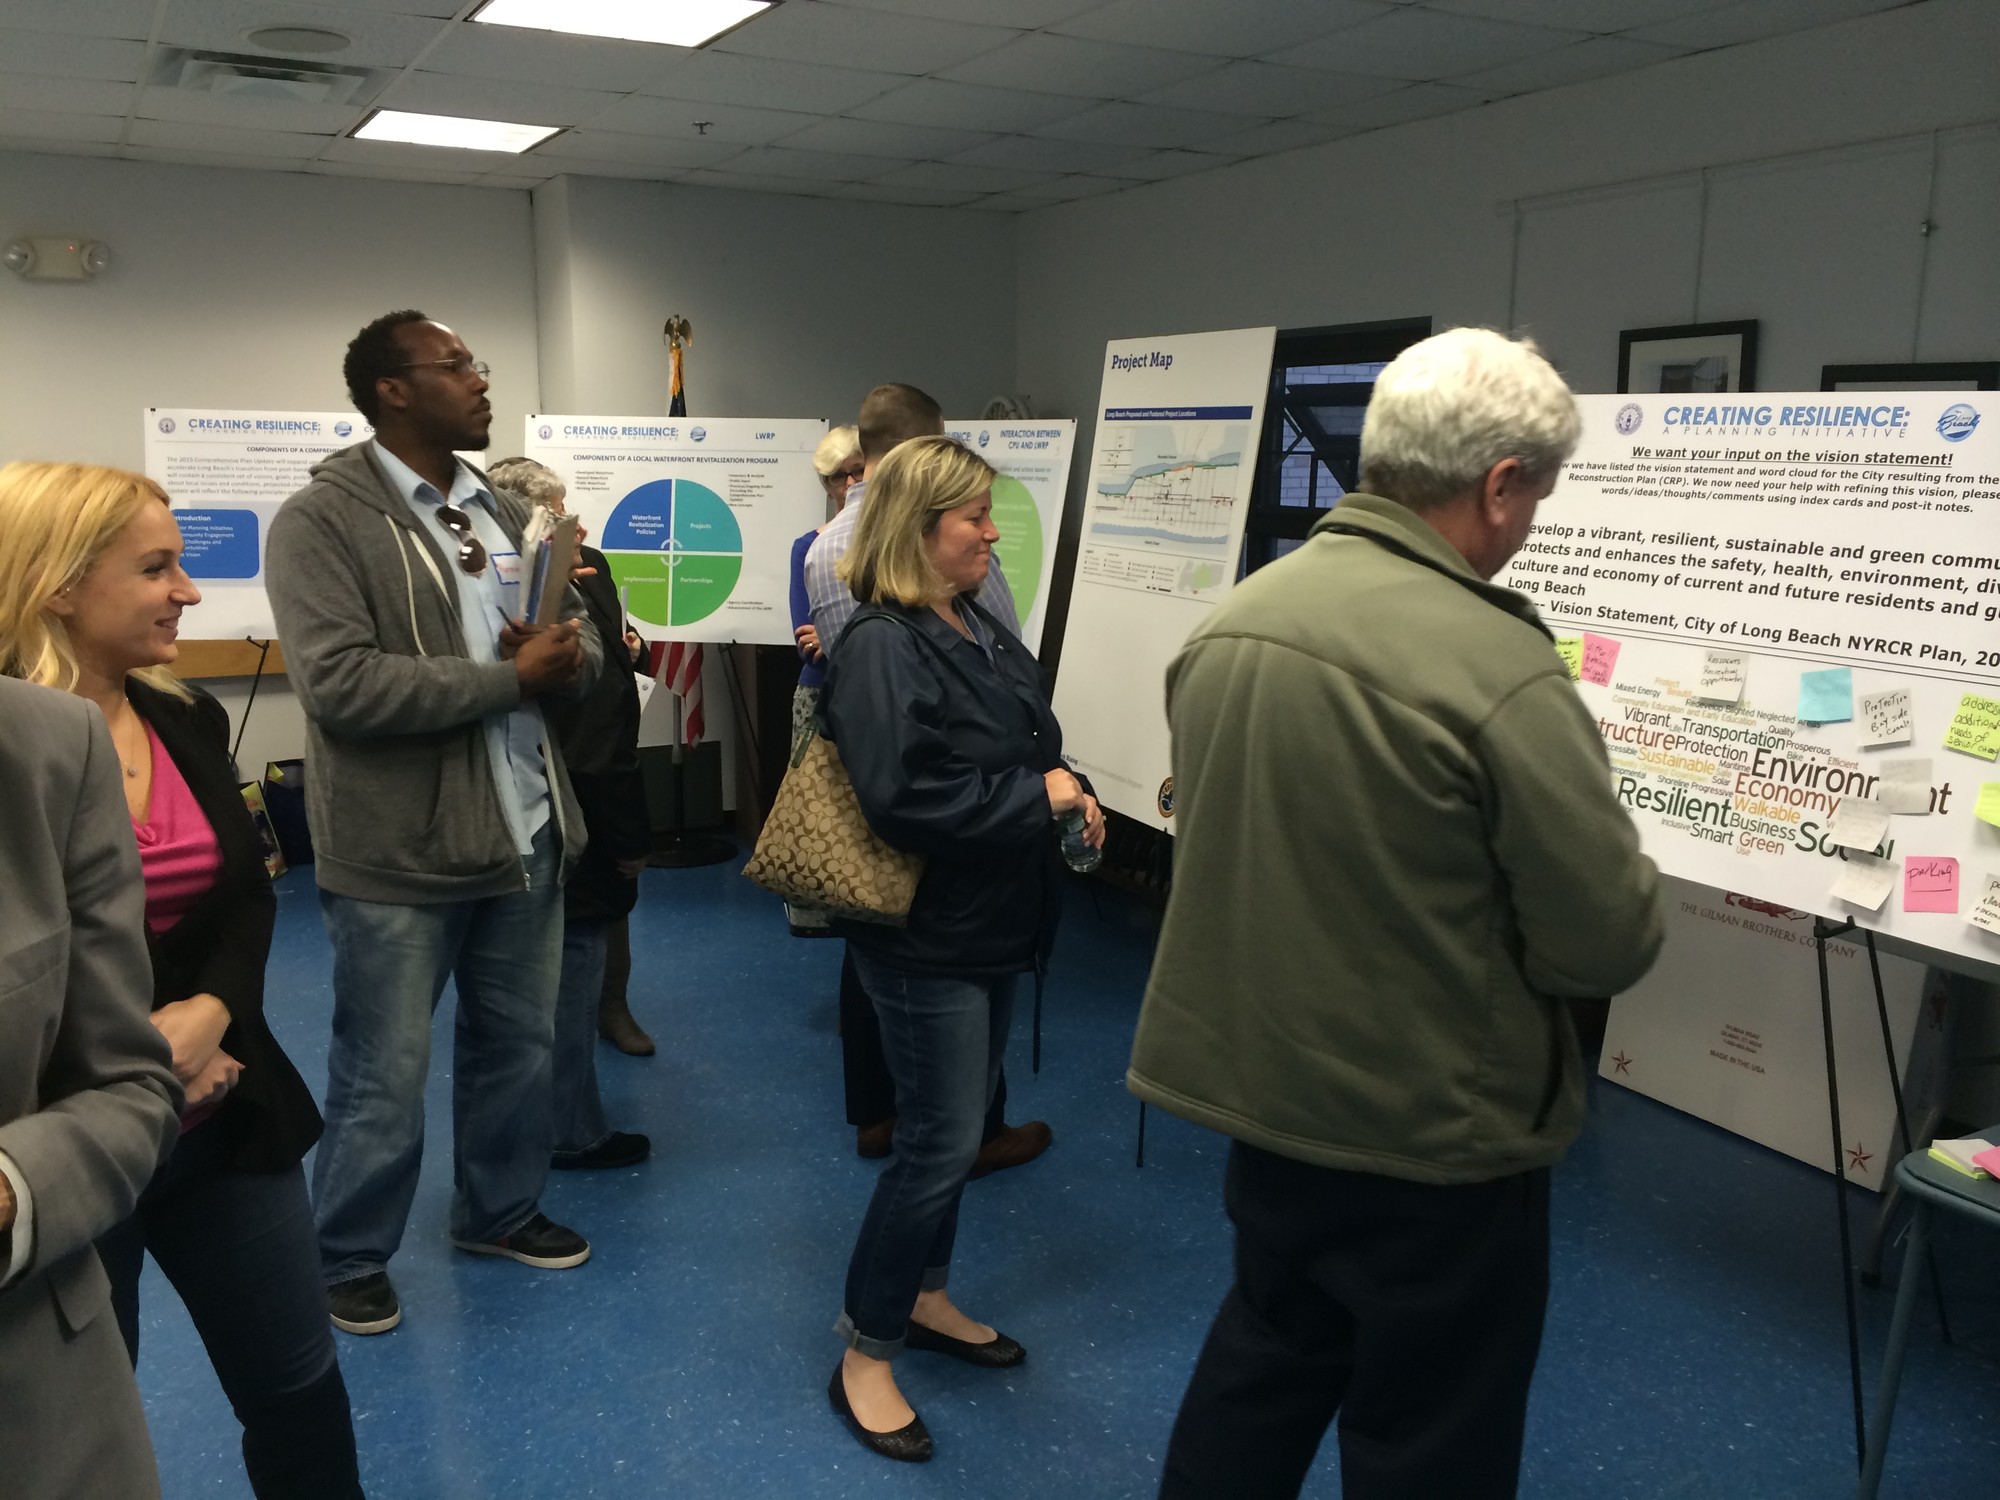 Residents explored stations outlining different parts of the city’s Comprehensive Plan at a meeting on April 28.